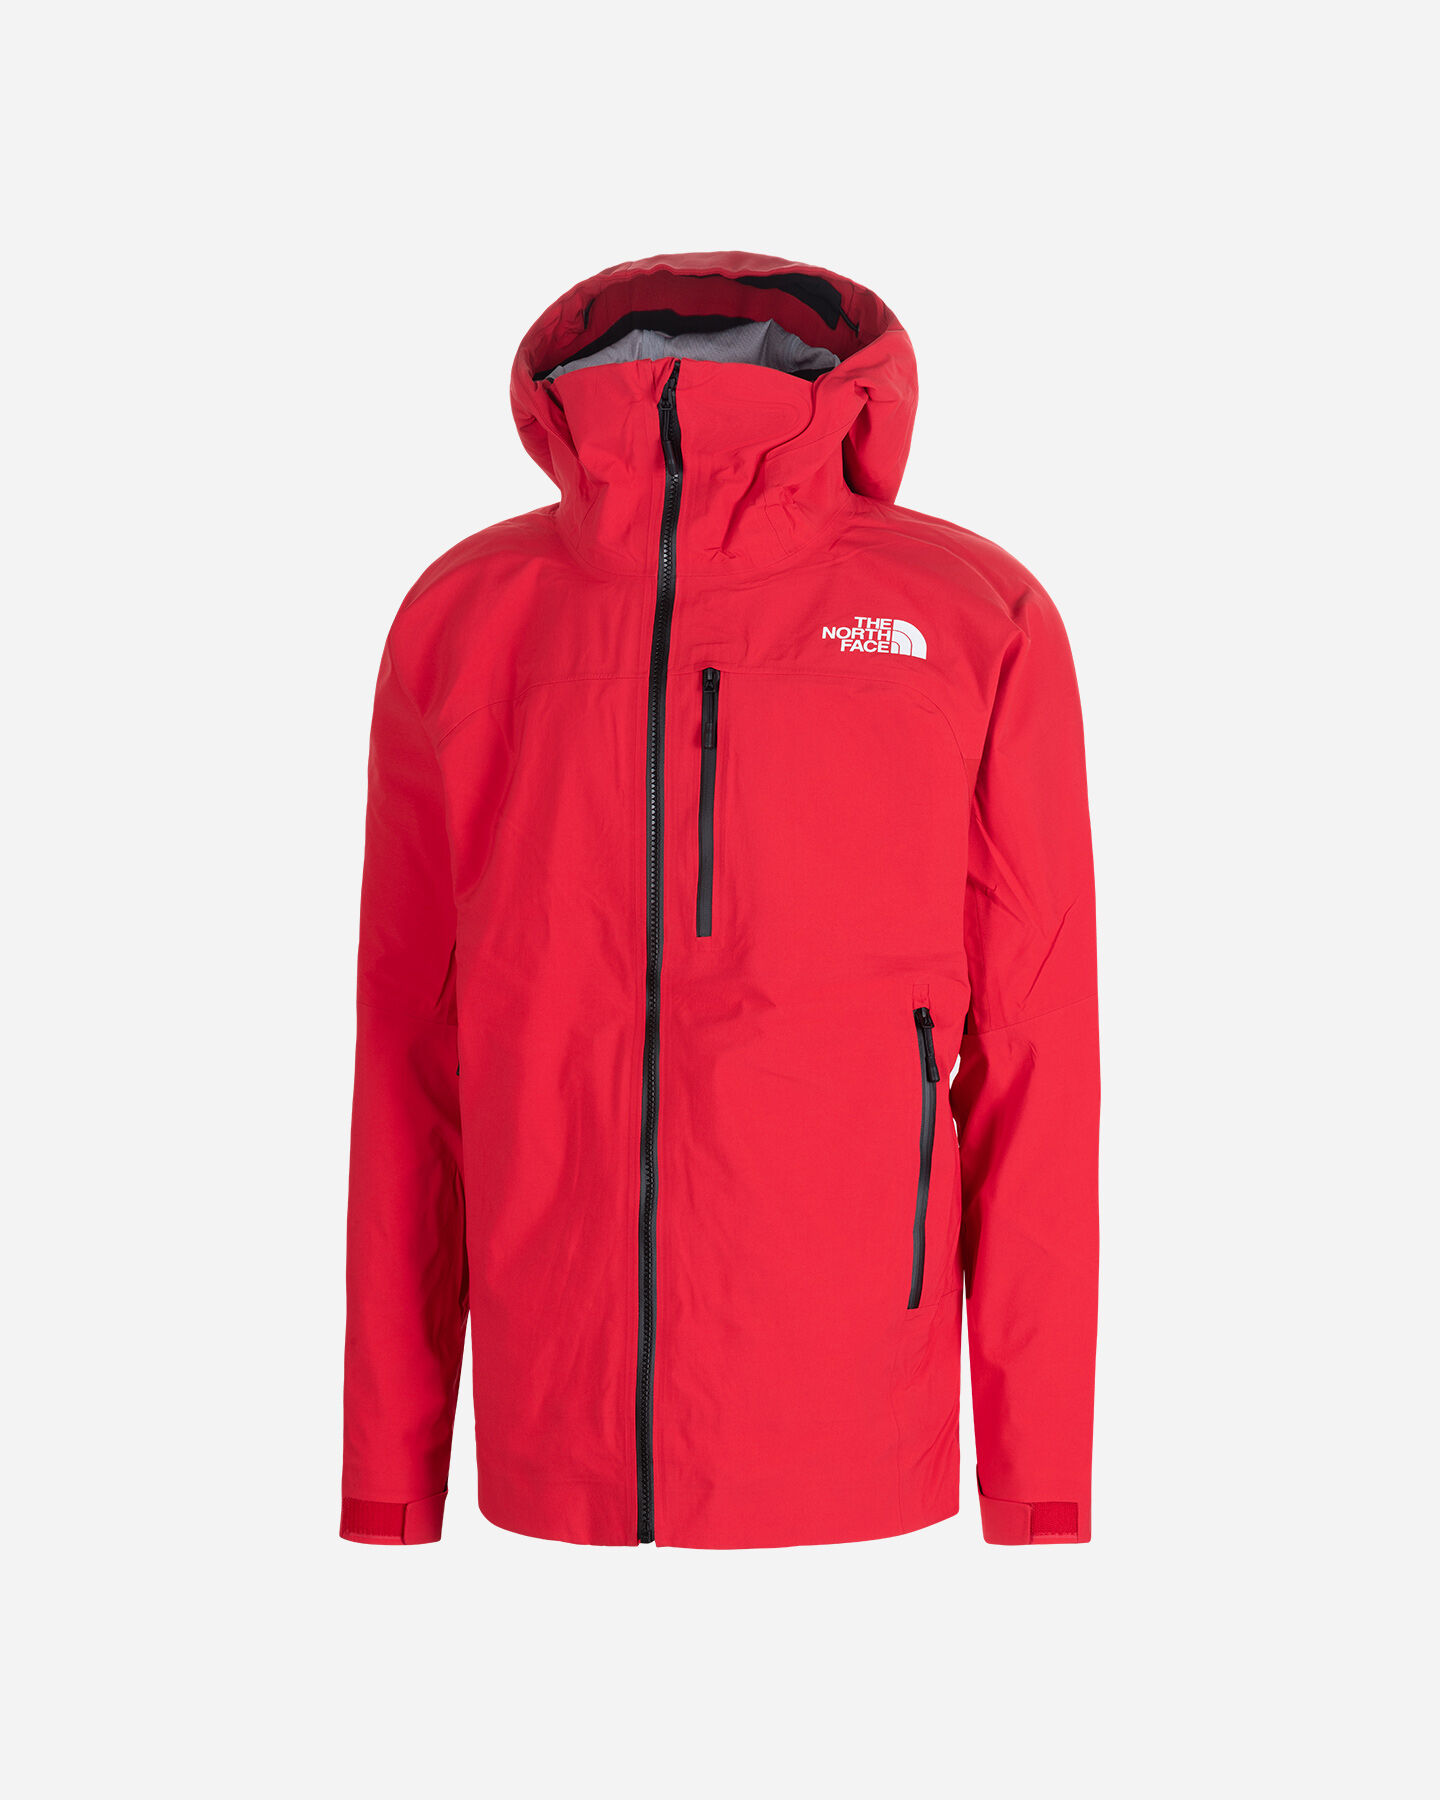  Giacca outdoor THE NORTH FACE SUMMIT TORRE EGGER M S5475493|682|S scatto 0